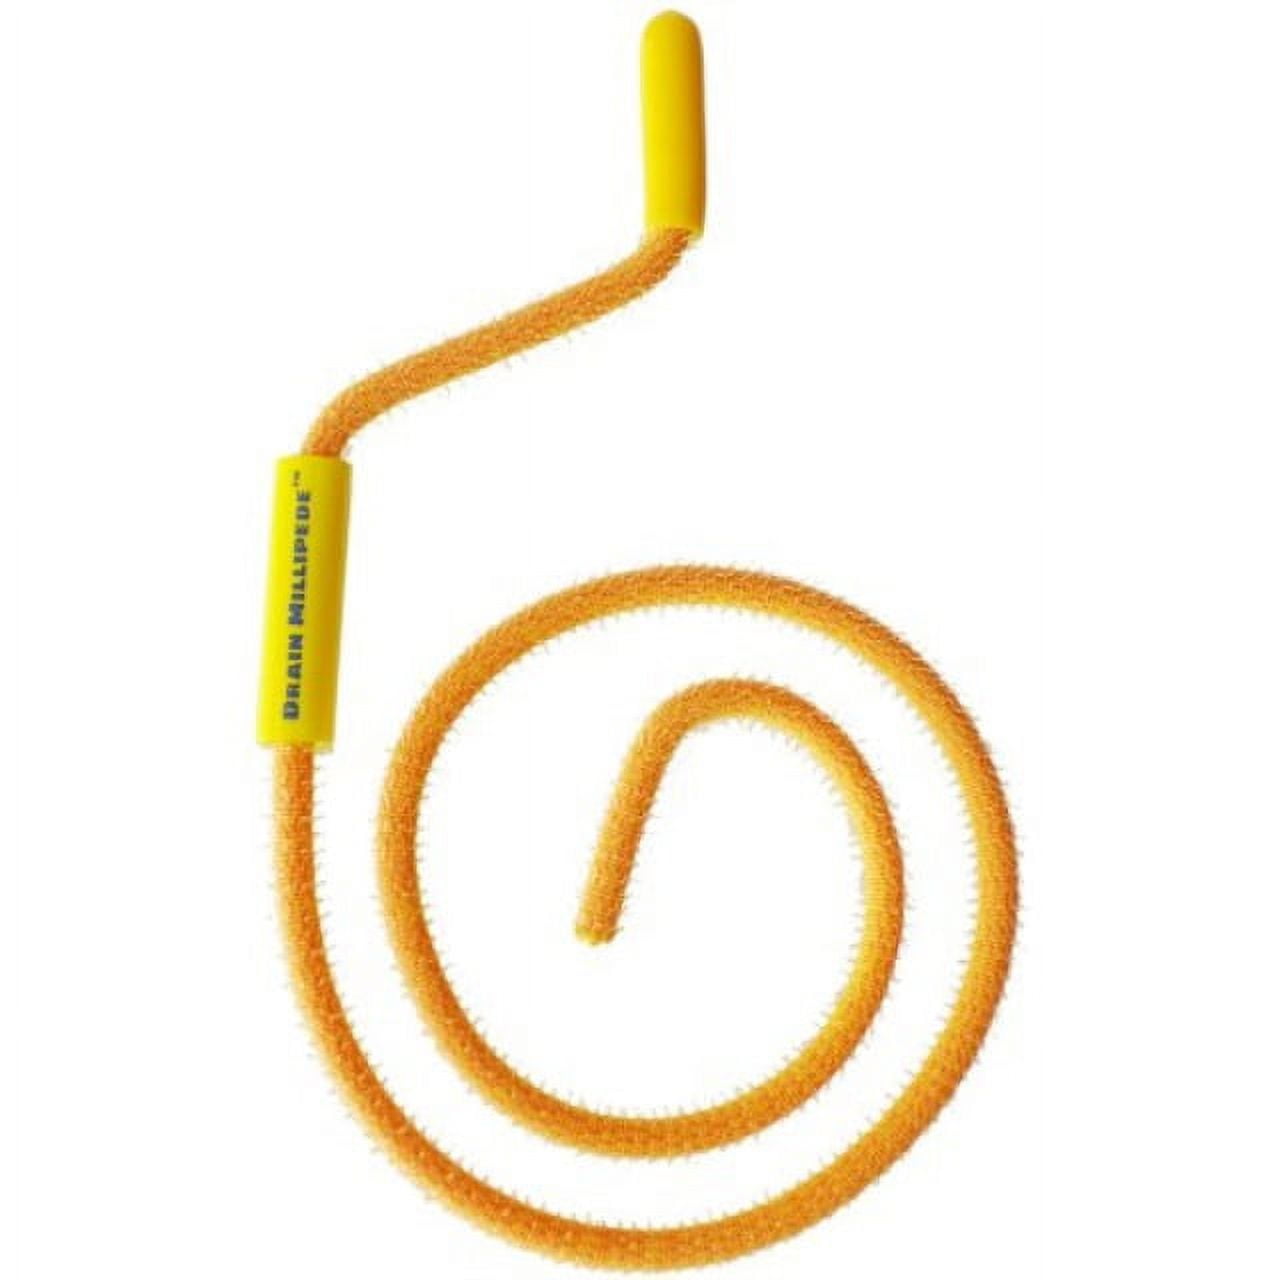 flexisnake drain millipede - drain clog remover - dependable, thin,  flexible, durable and easy to use - safe for most drains and grates - made  in usa, 18 inch - yellow 